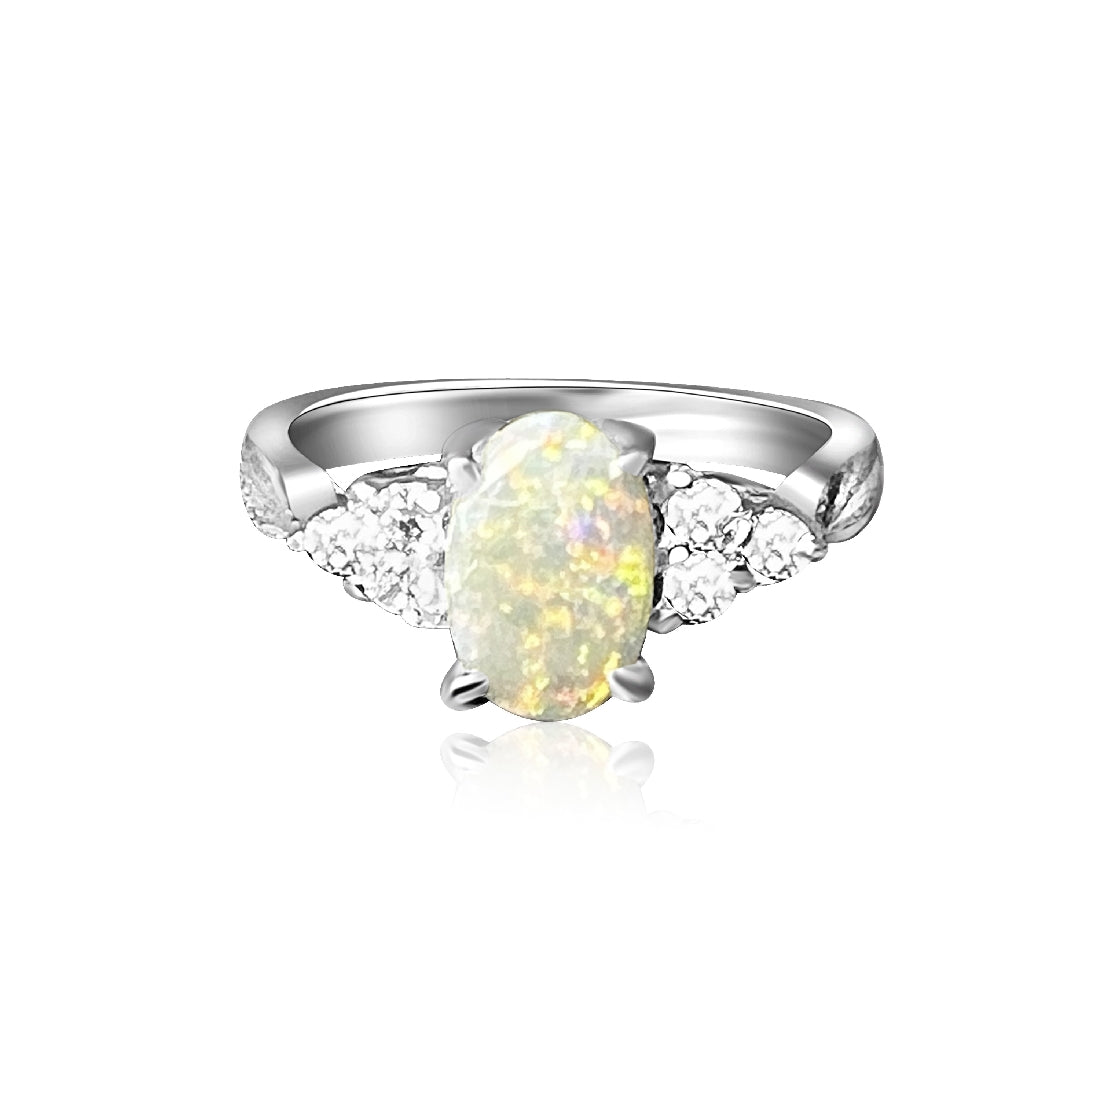 One Sterling Silver 7x5mm White opal and cz ring - Masterpiece Jewellery Opal & Gems Sydney Australia | Online Shop